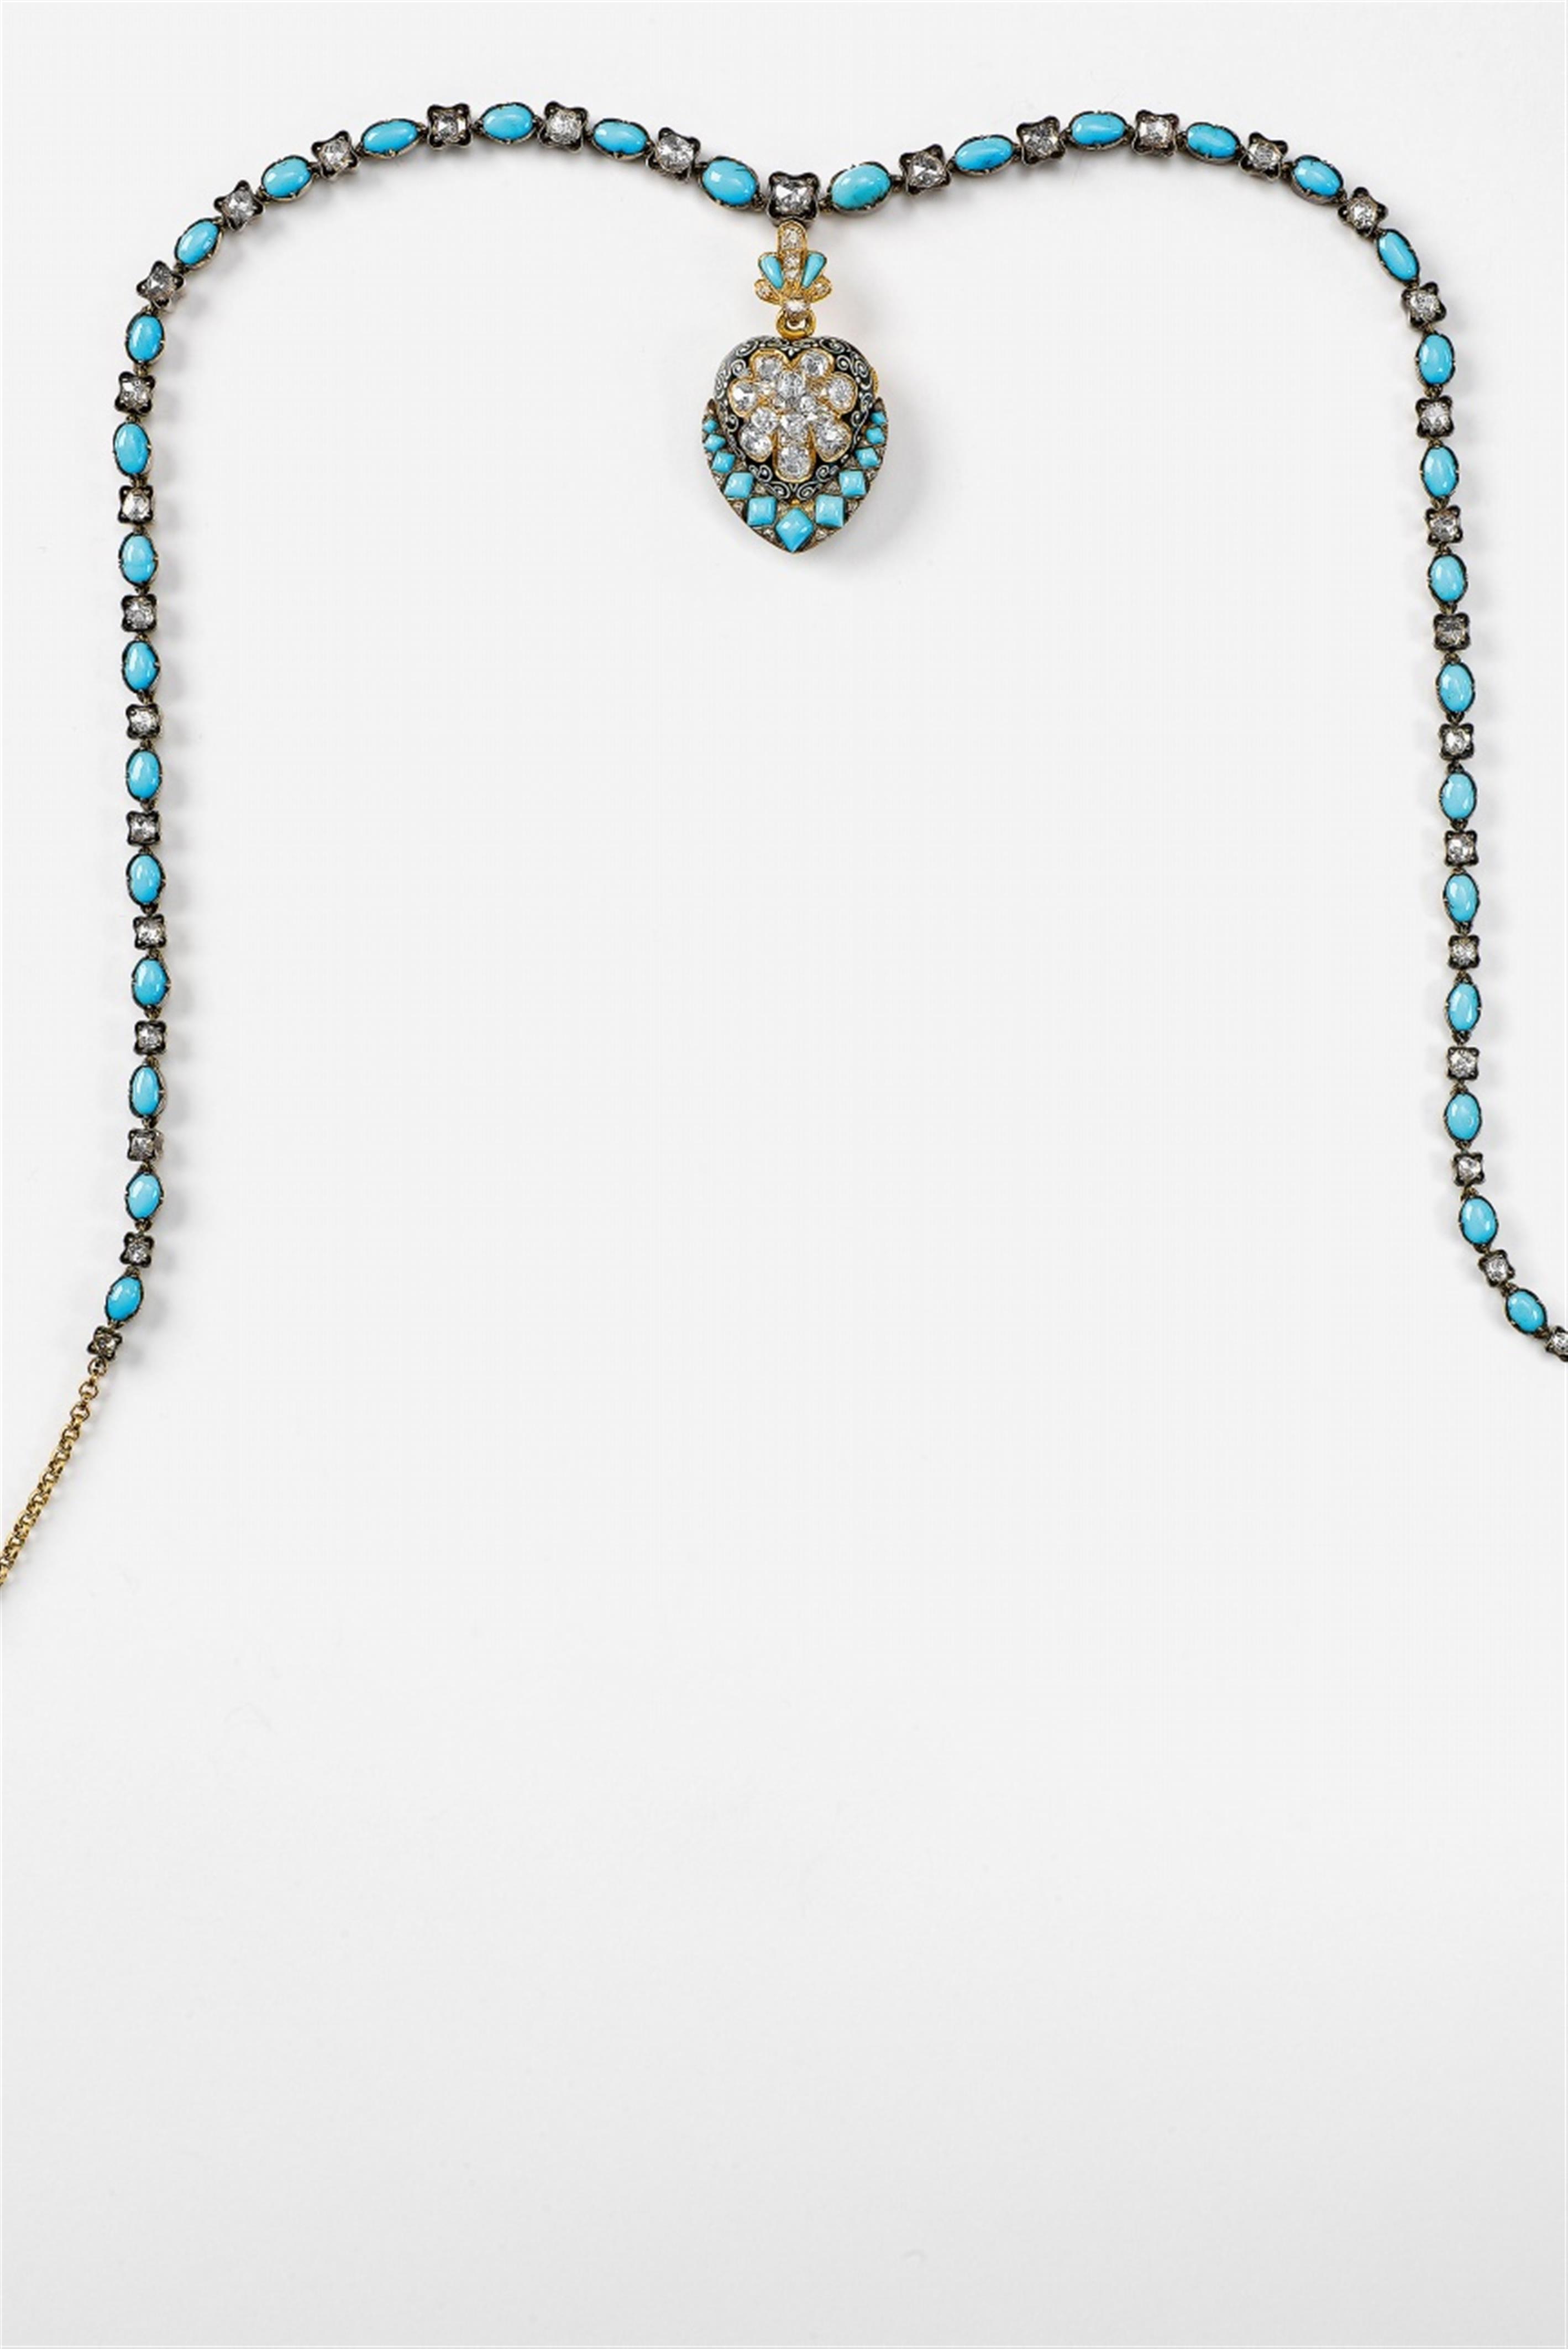 A Historicist 14k gold, turquoise and diamond pendant - image-1